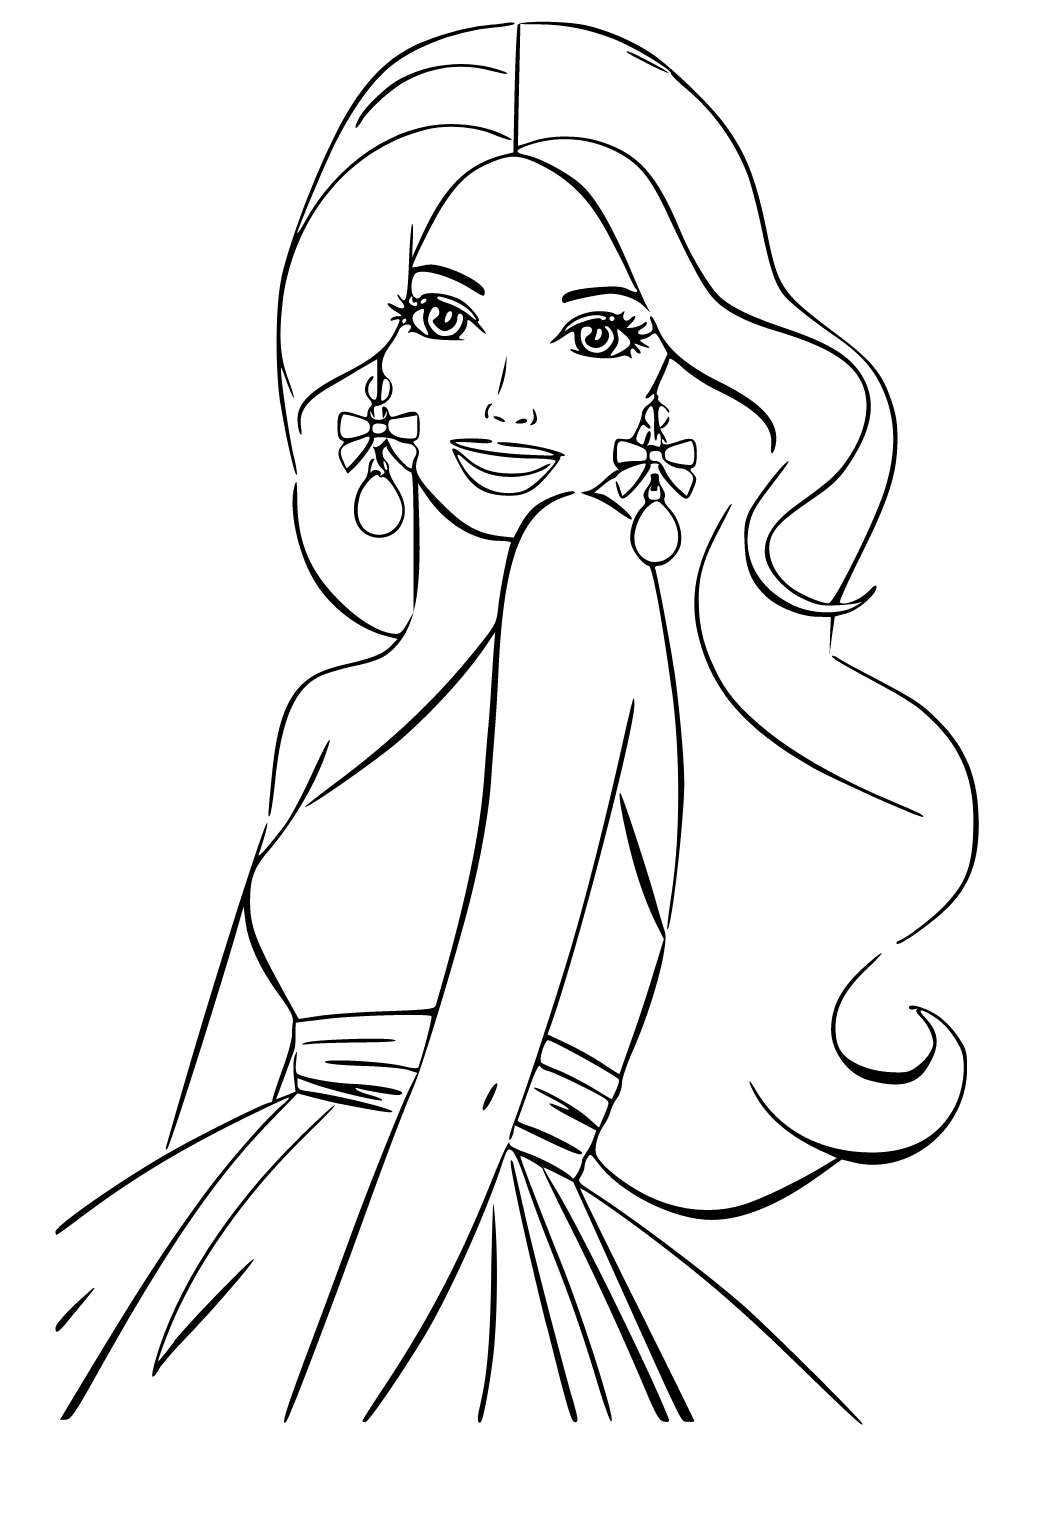 Free printable barbie earrings coloring page for adults and kids